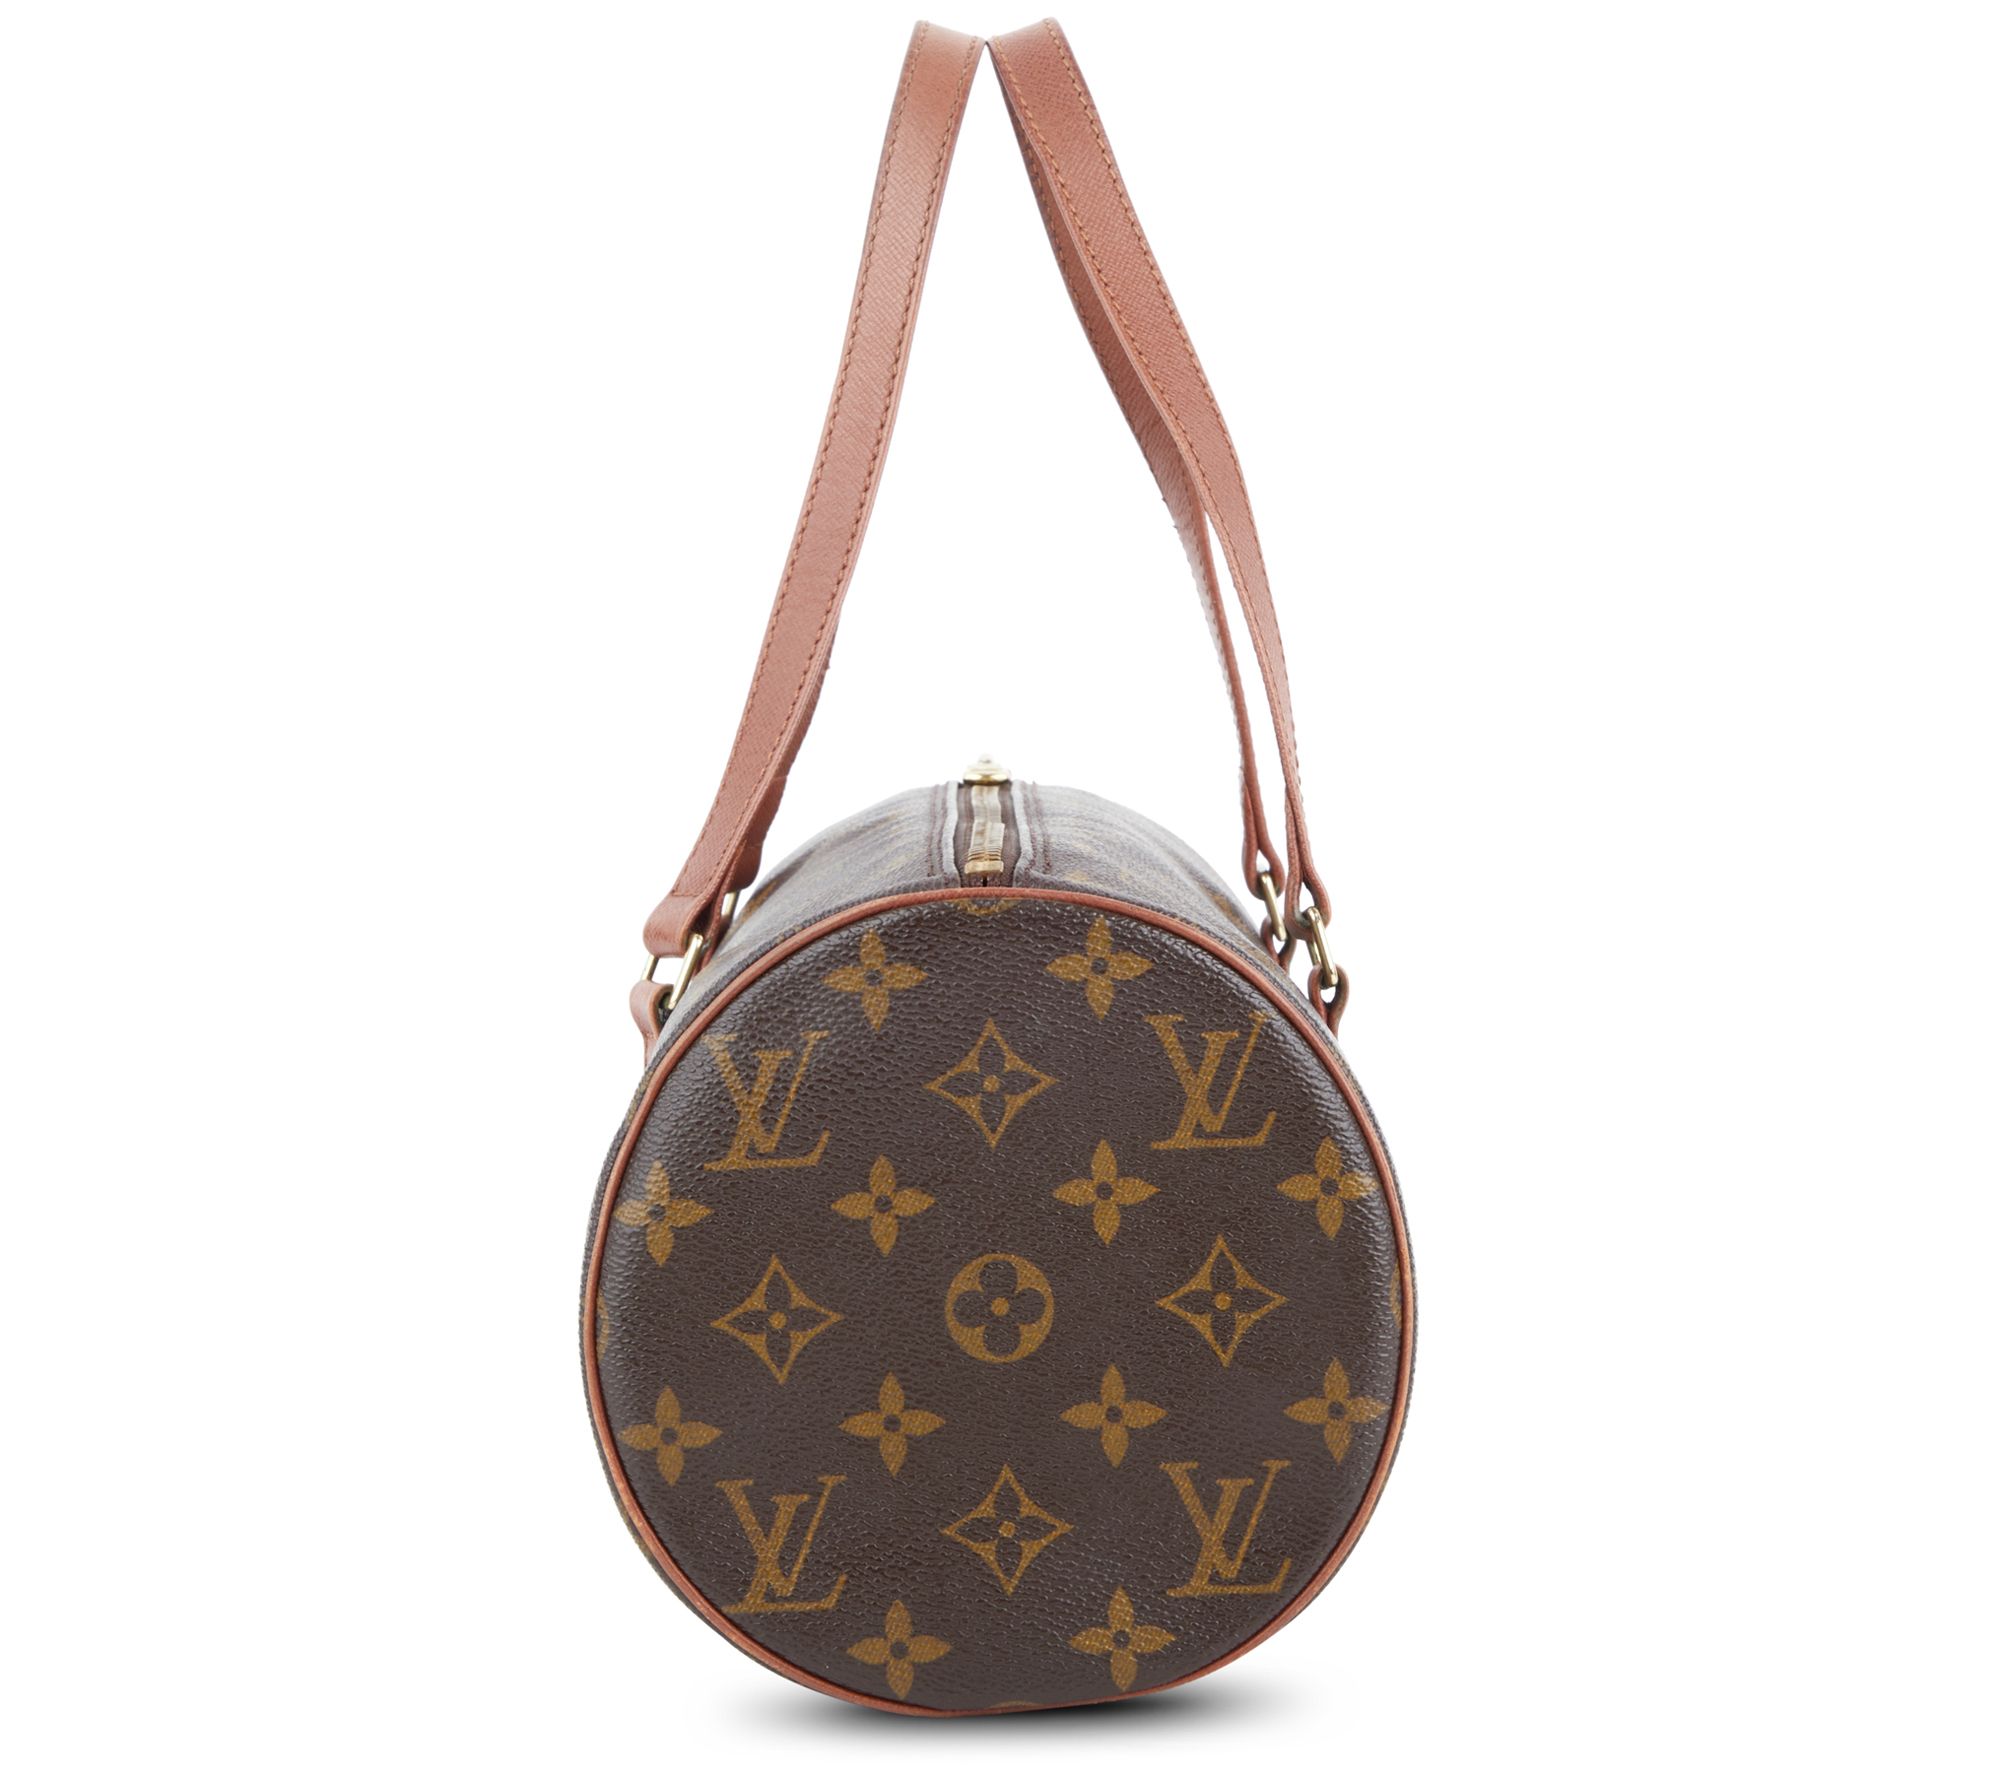  Louis Vuitton Women's Pre-Loved Papillon Pouch, Monogram,  Brown, One Size : Clothing, Shoes & Jewelry